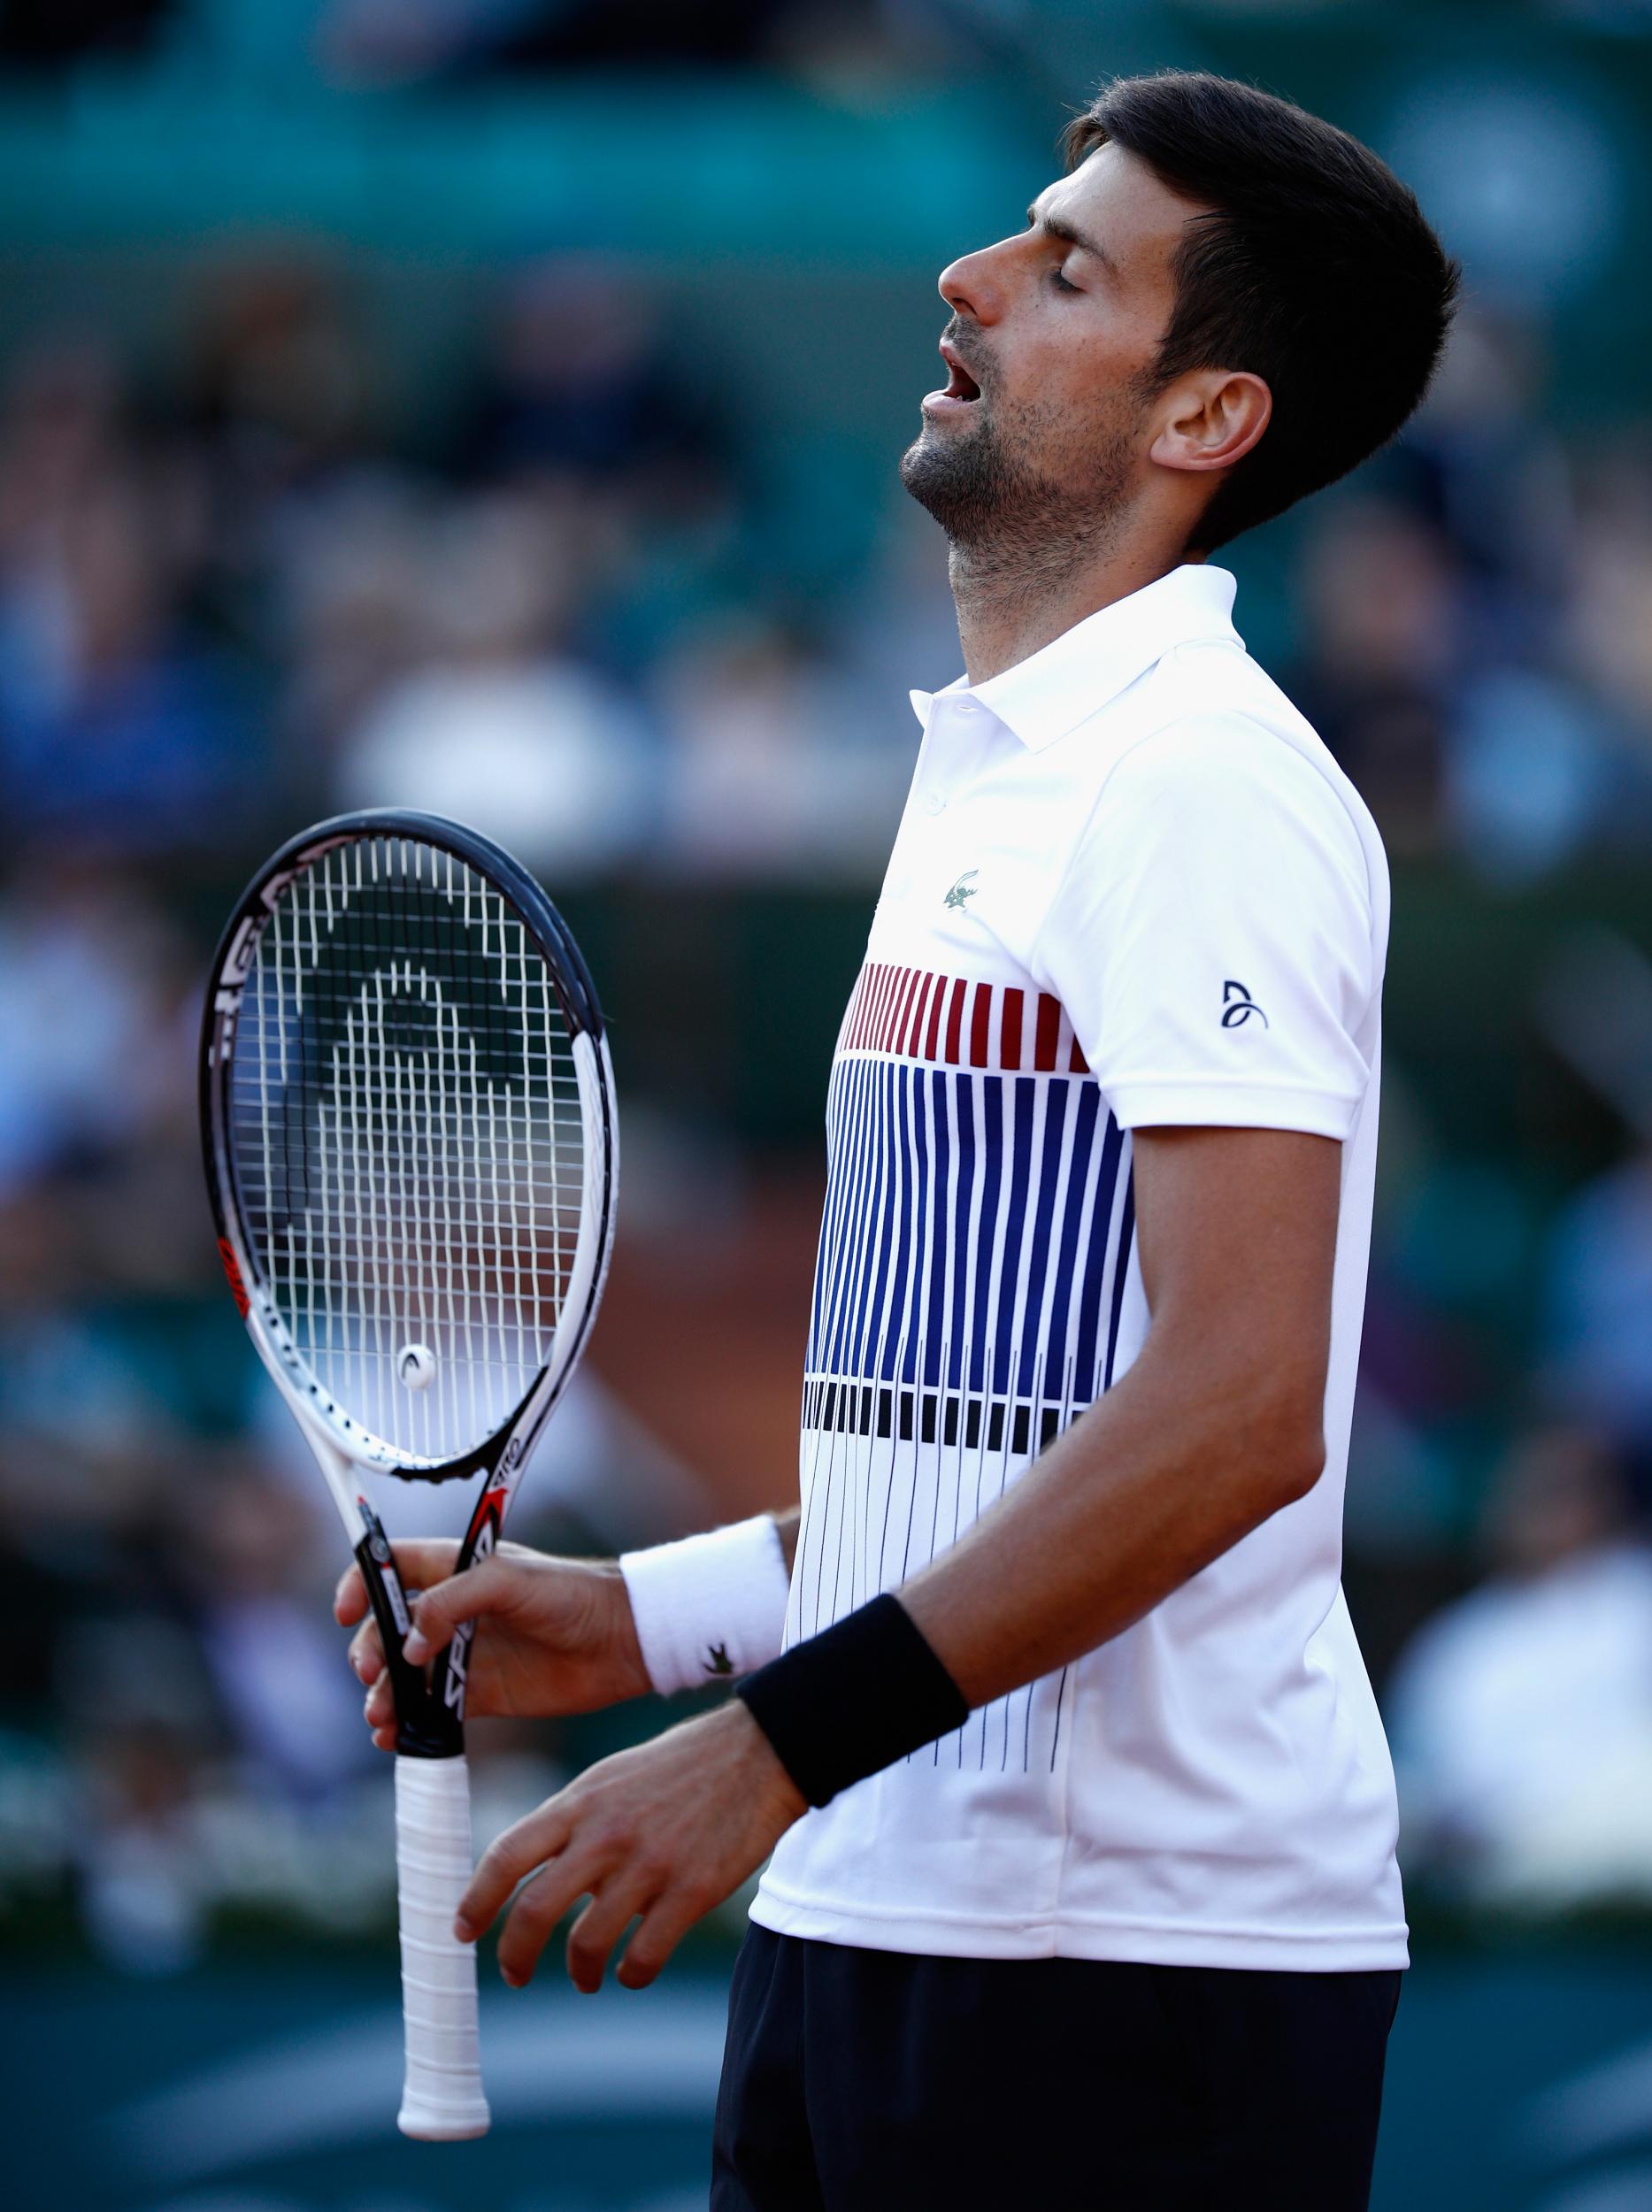 Djokovic has struggled for form in recent months